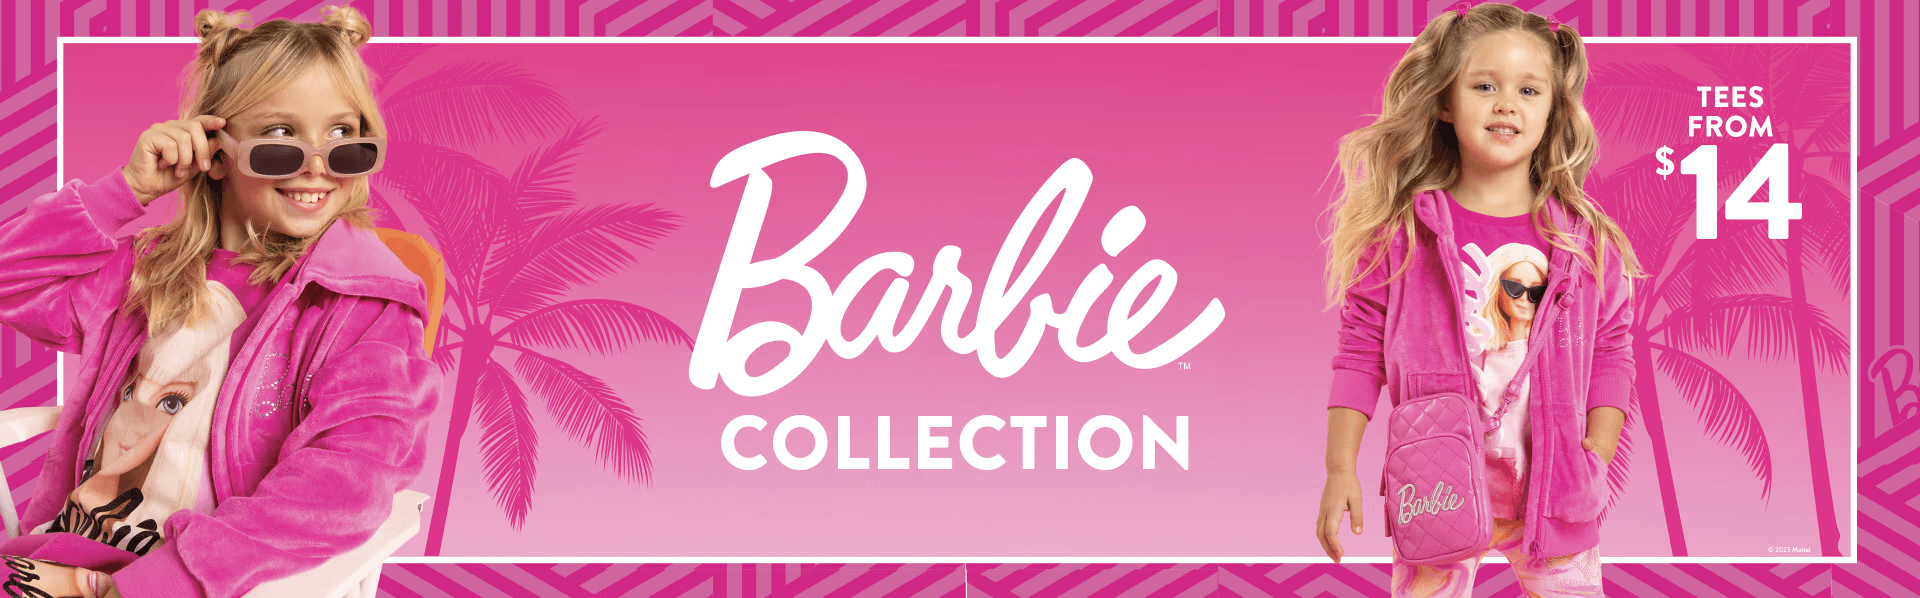 Best&Less Barbie Collection